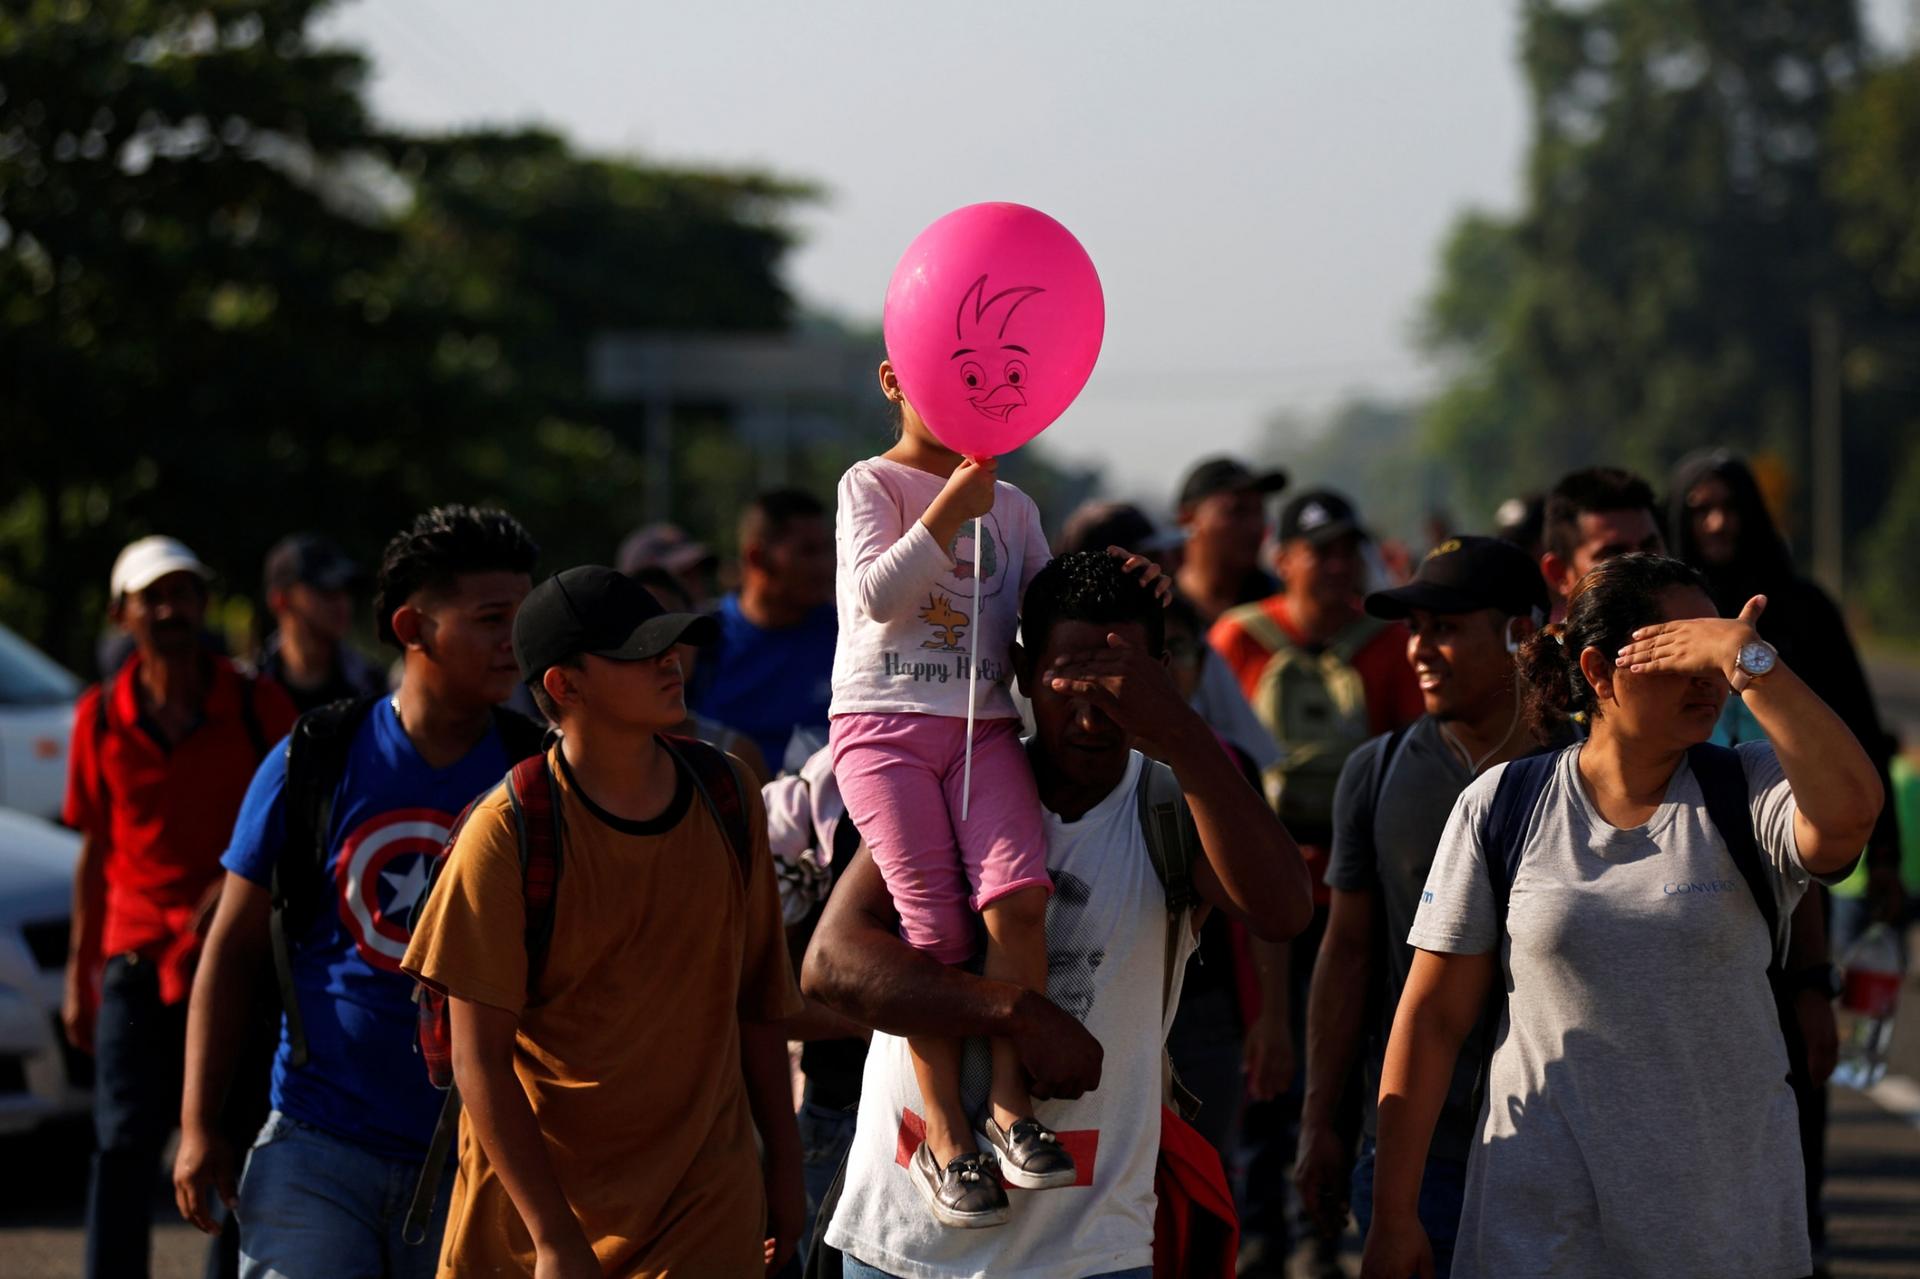 A large group of people are shown in the street walking and one person is carrying a young girl on their shoulder who has a pink balloon.